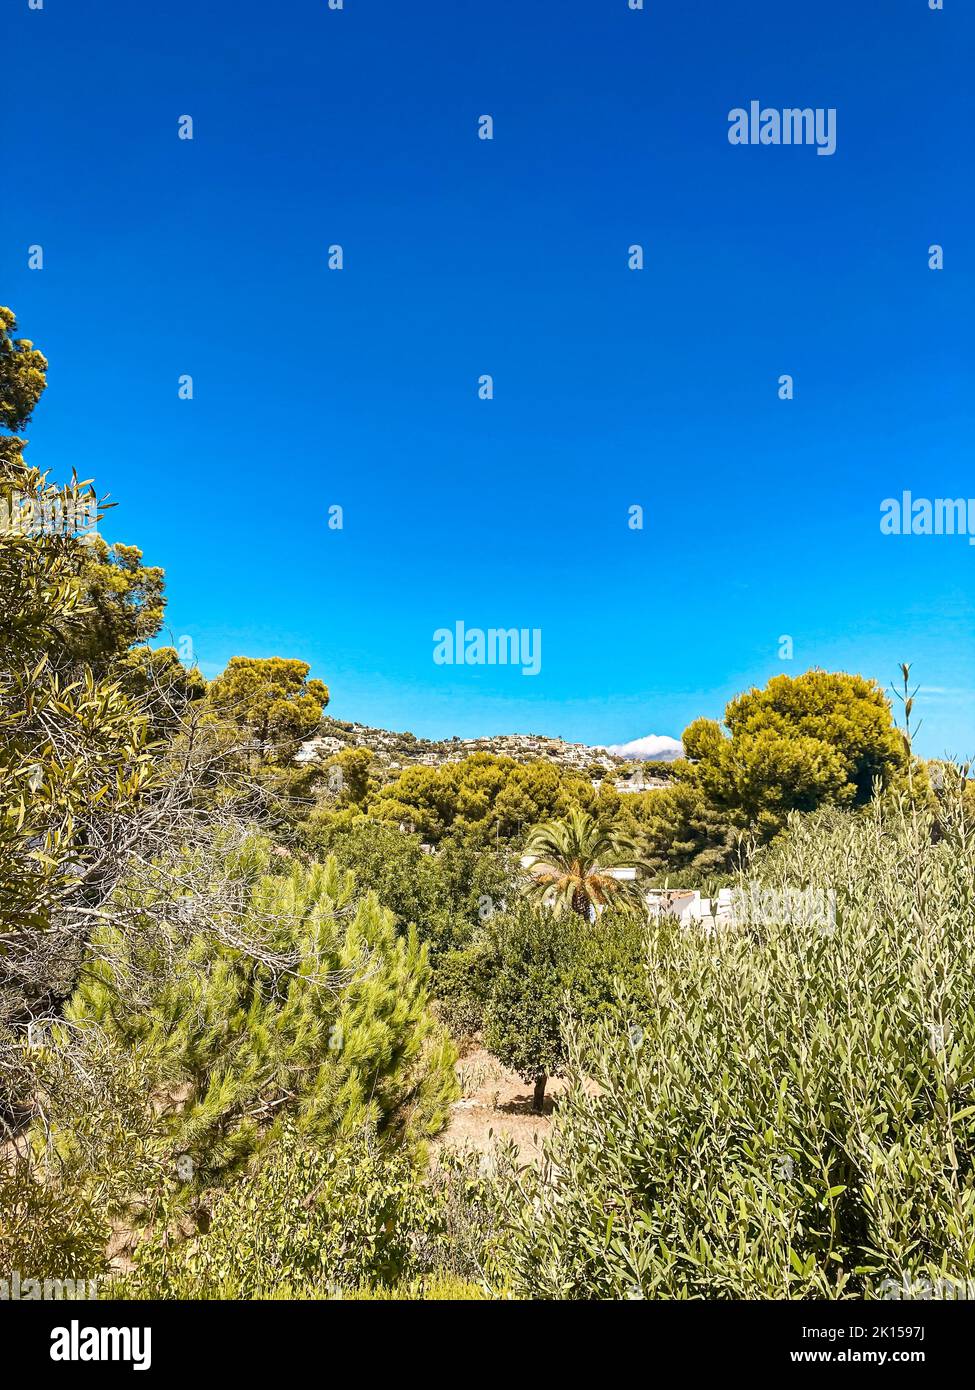 Amazing scenery of tropical trees, plants, shrubs and vegetation on a hot day in Teulada, Spain Stock Photo